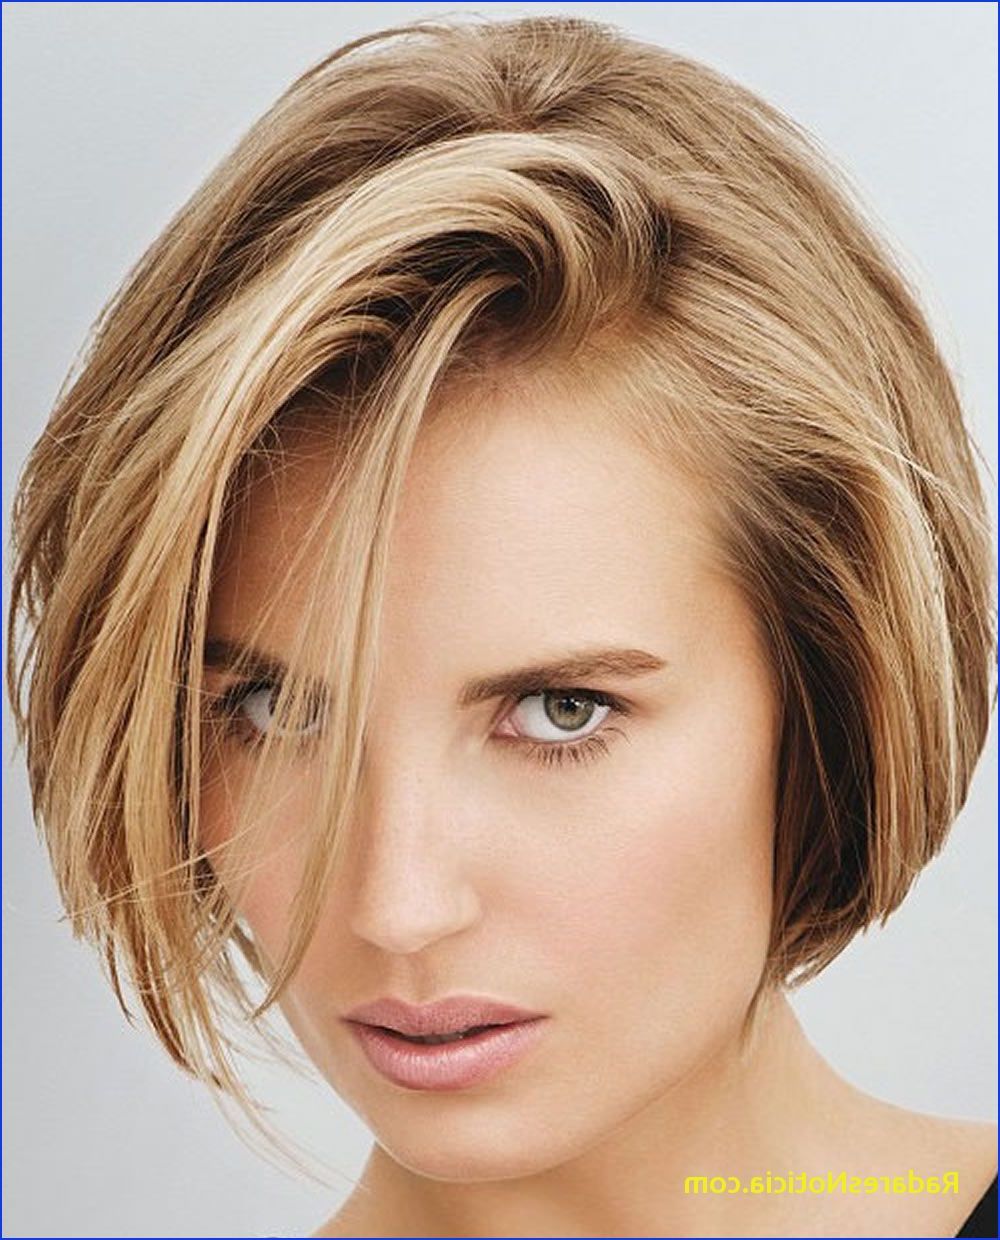 Long Bob With Bangs 2018 31 Chic Short Haircut Ideas 2018 & Pixie Intended For Chic Short Haircuts (View 8 of 25)